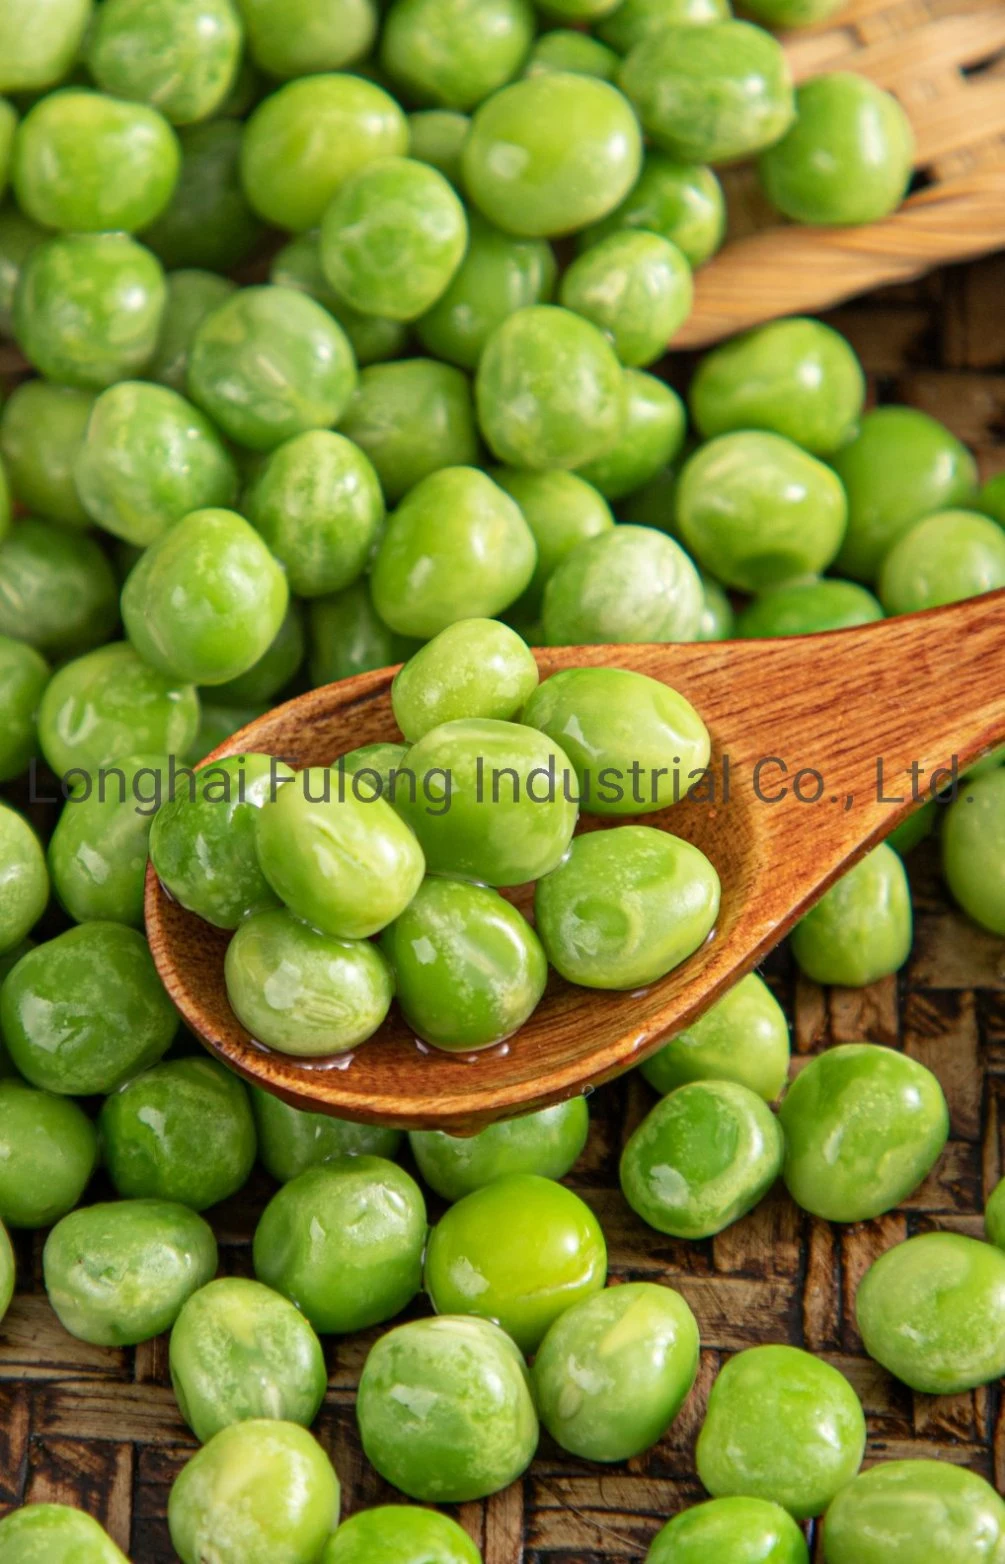 Frozen Vegetable High Quality IQF Sugar Snap Peas Kernel